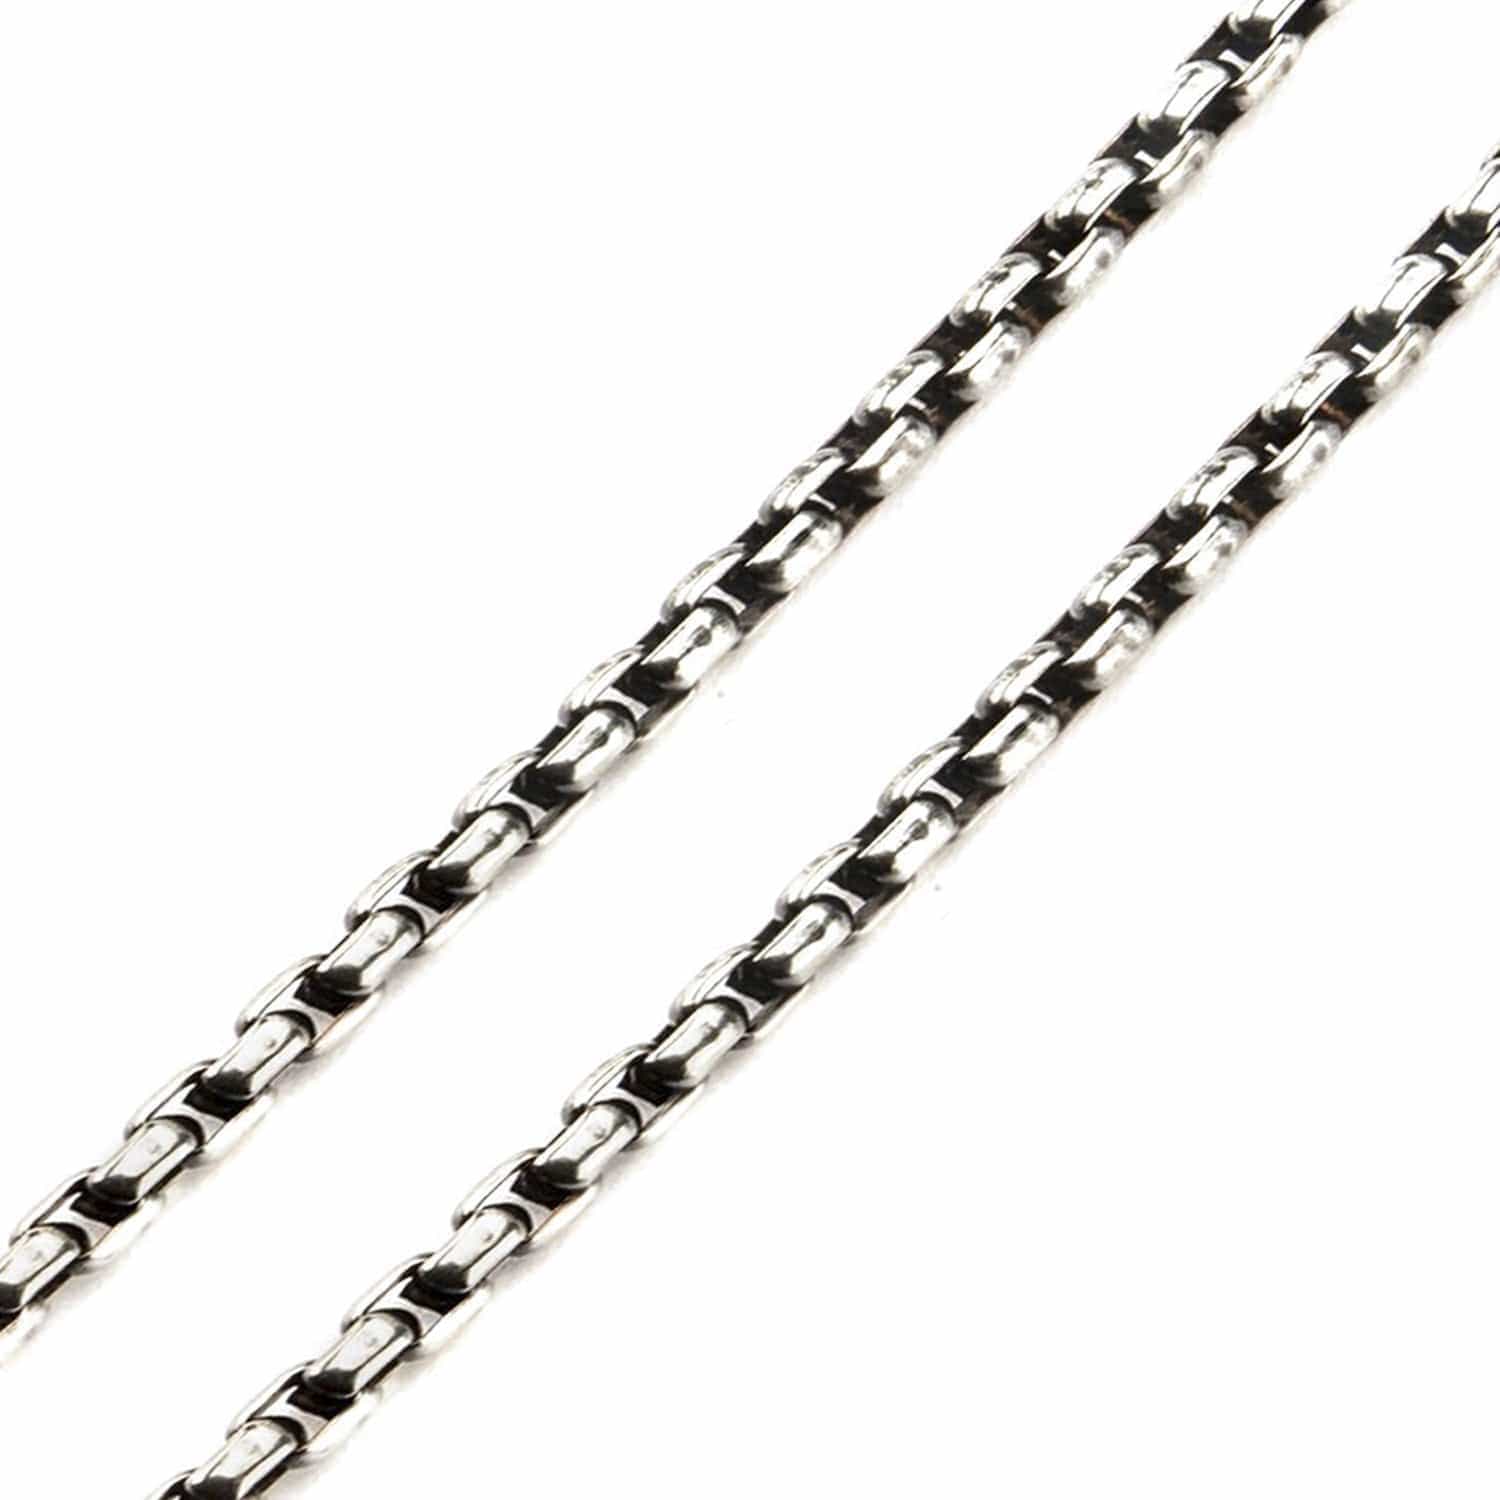 INOX JEWELRY Chains Antiqued Silver Tone Stainless Steel 3mm Oxidized Bold Box Chain